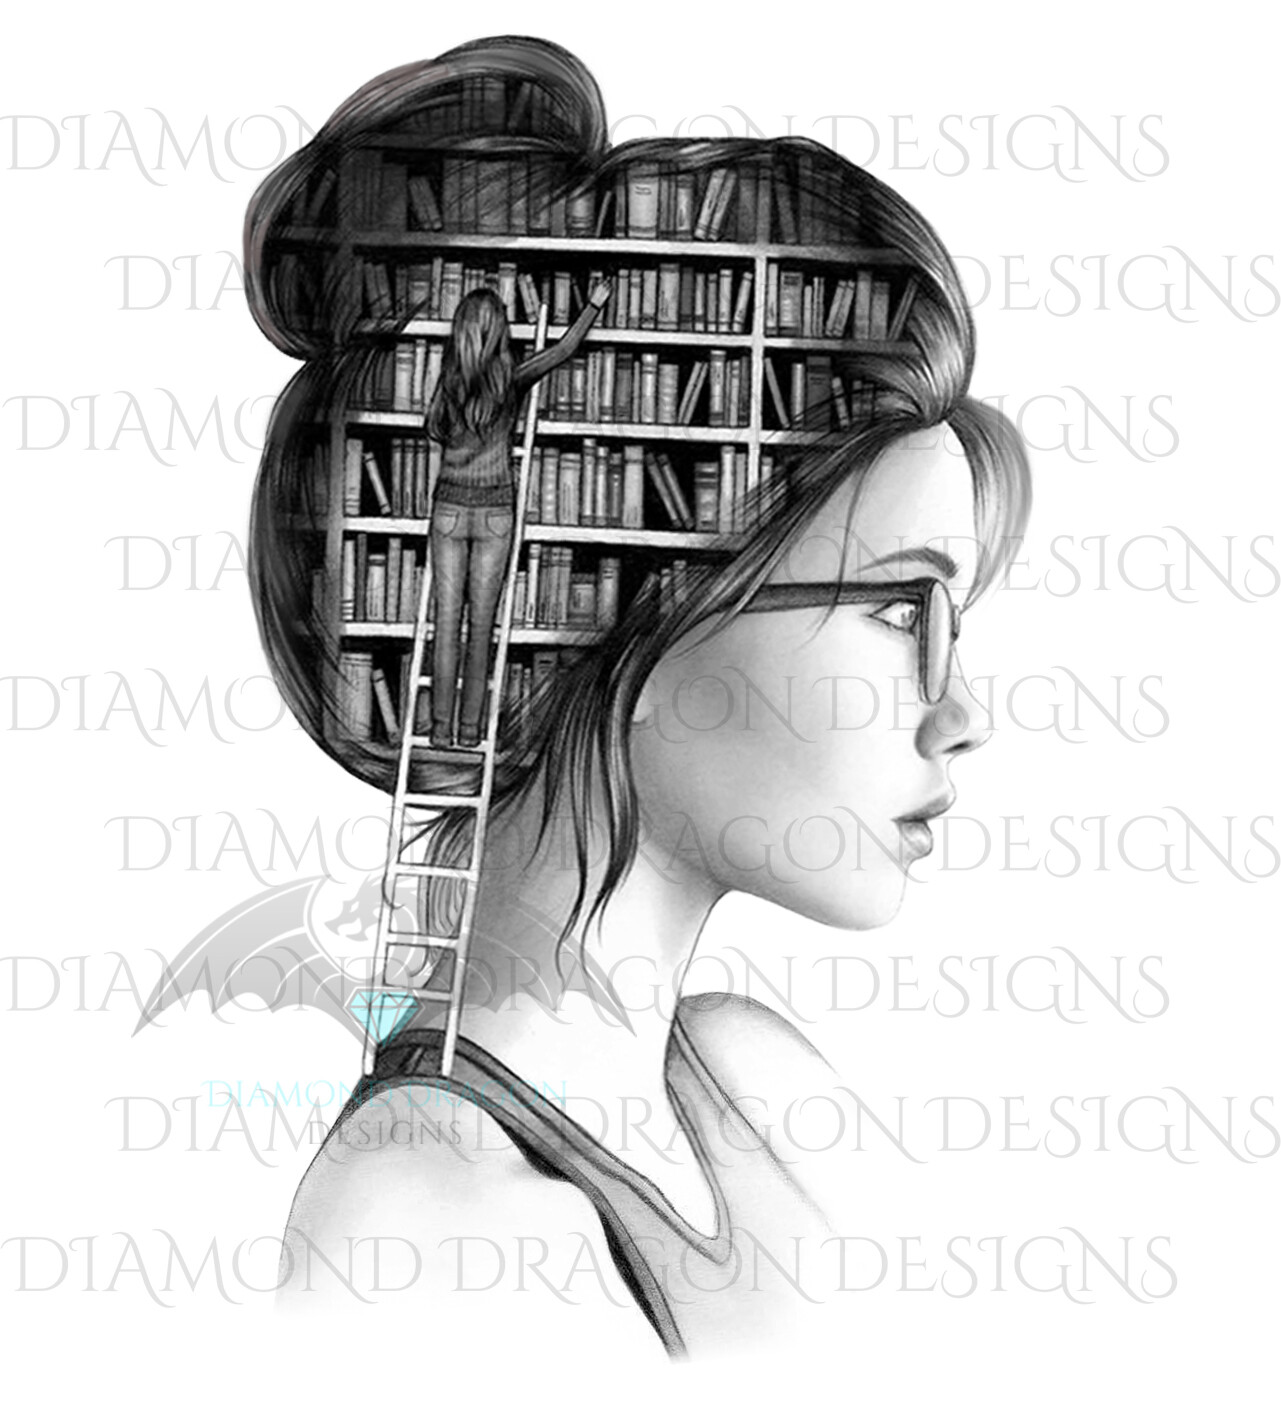 Books - Lady Library, Book Girl, Book Lover, Woman with Books, Bookshelf, Black and White, Waterslide